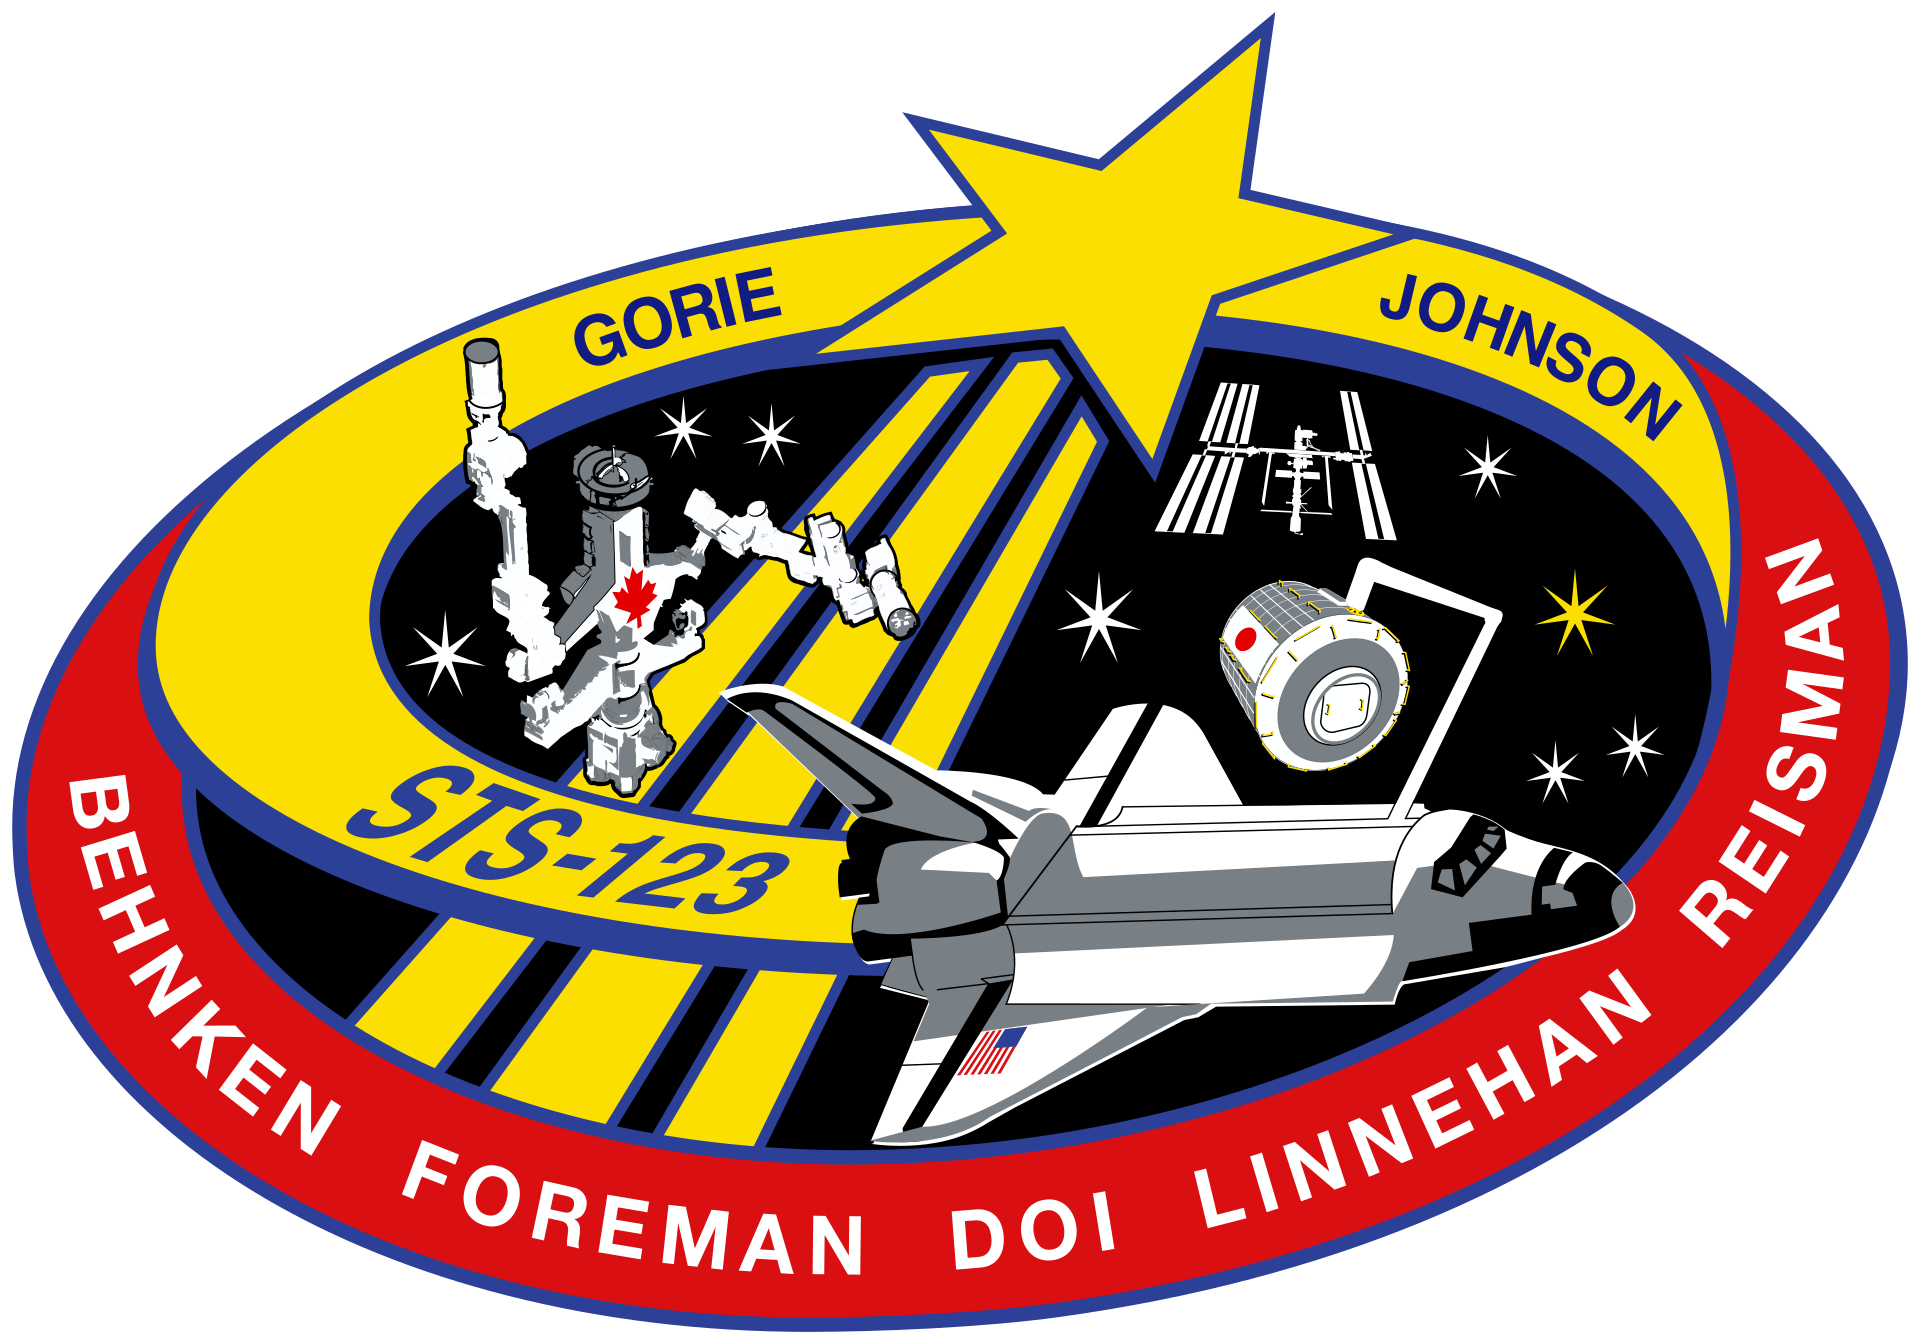 Mission patch for STS-123